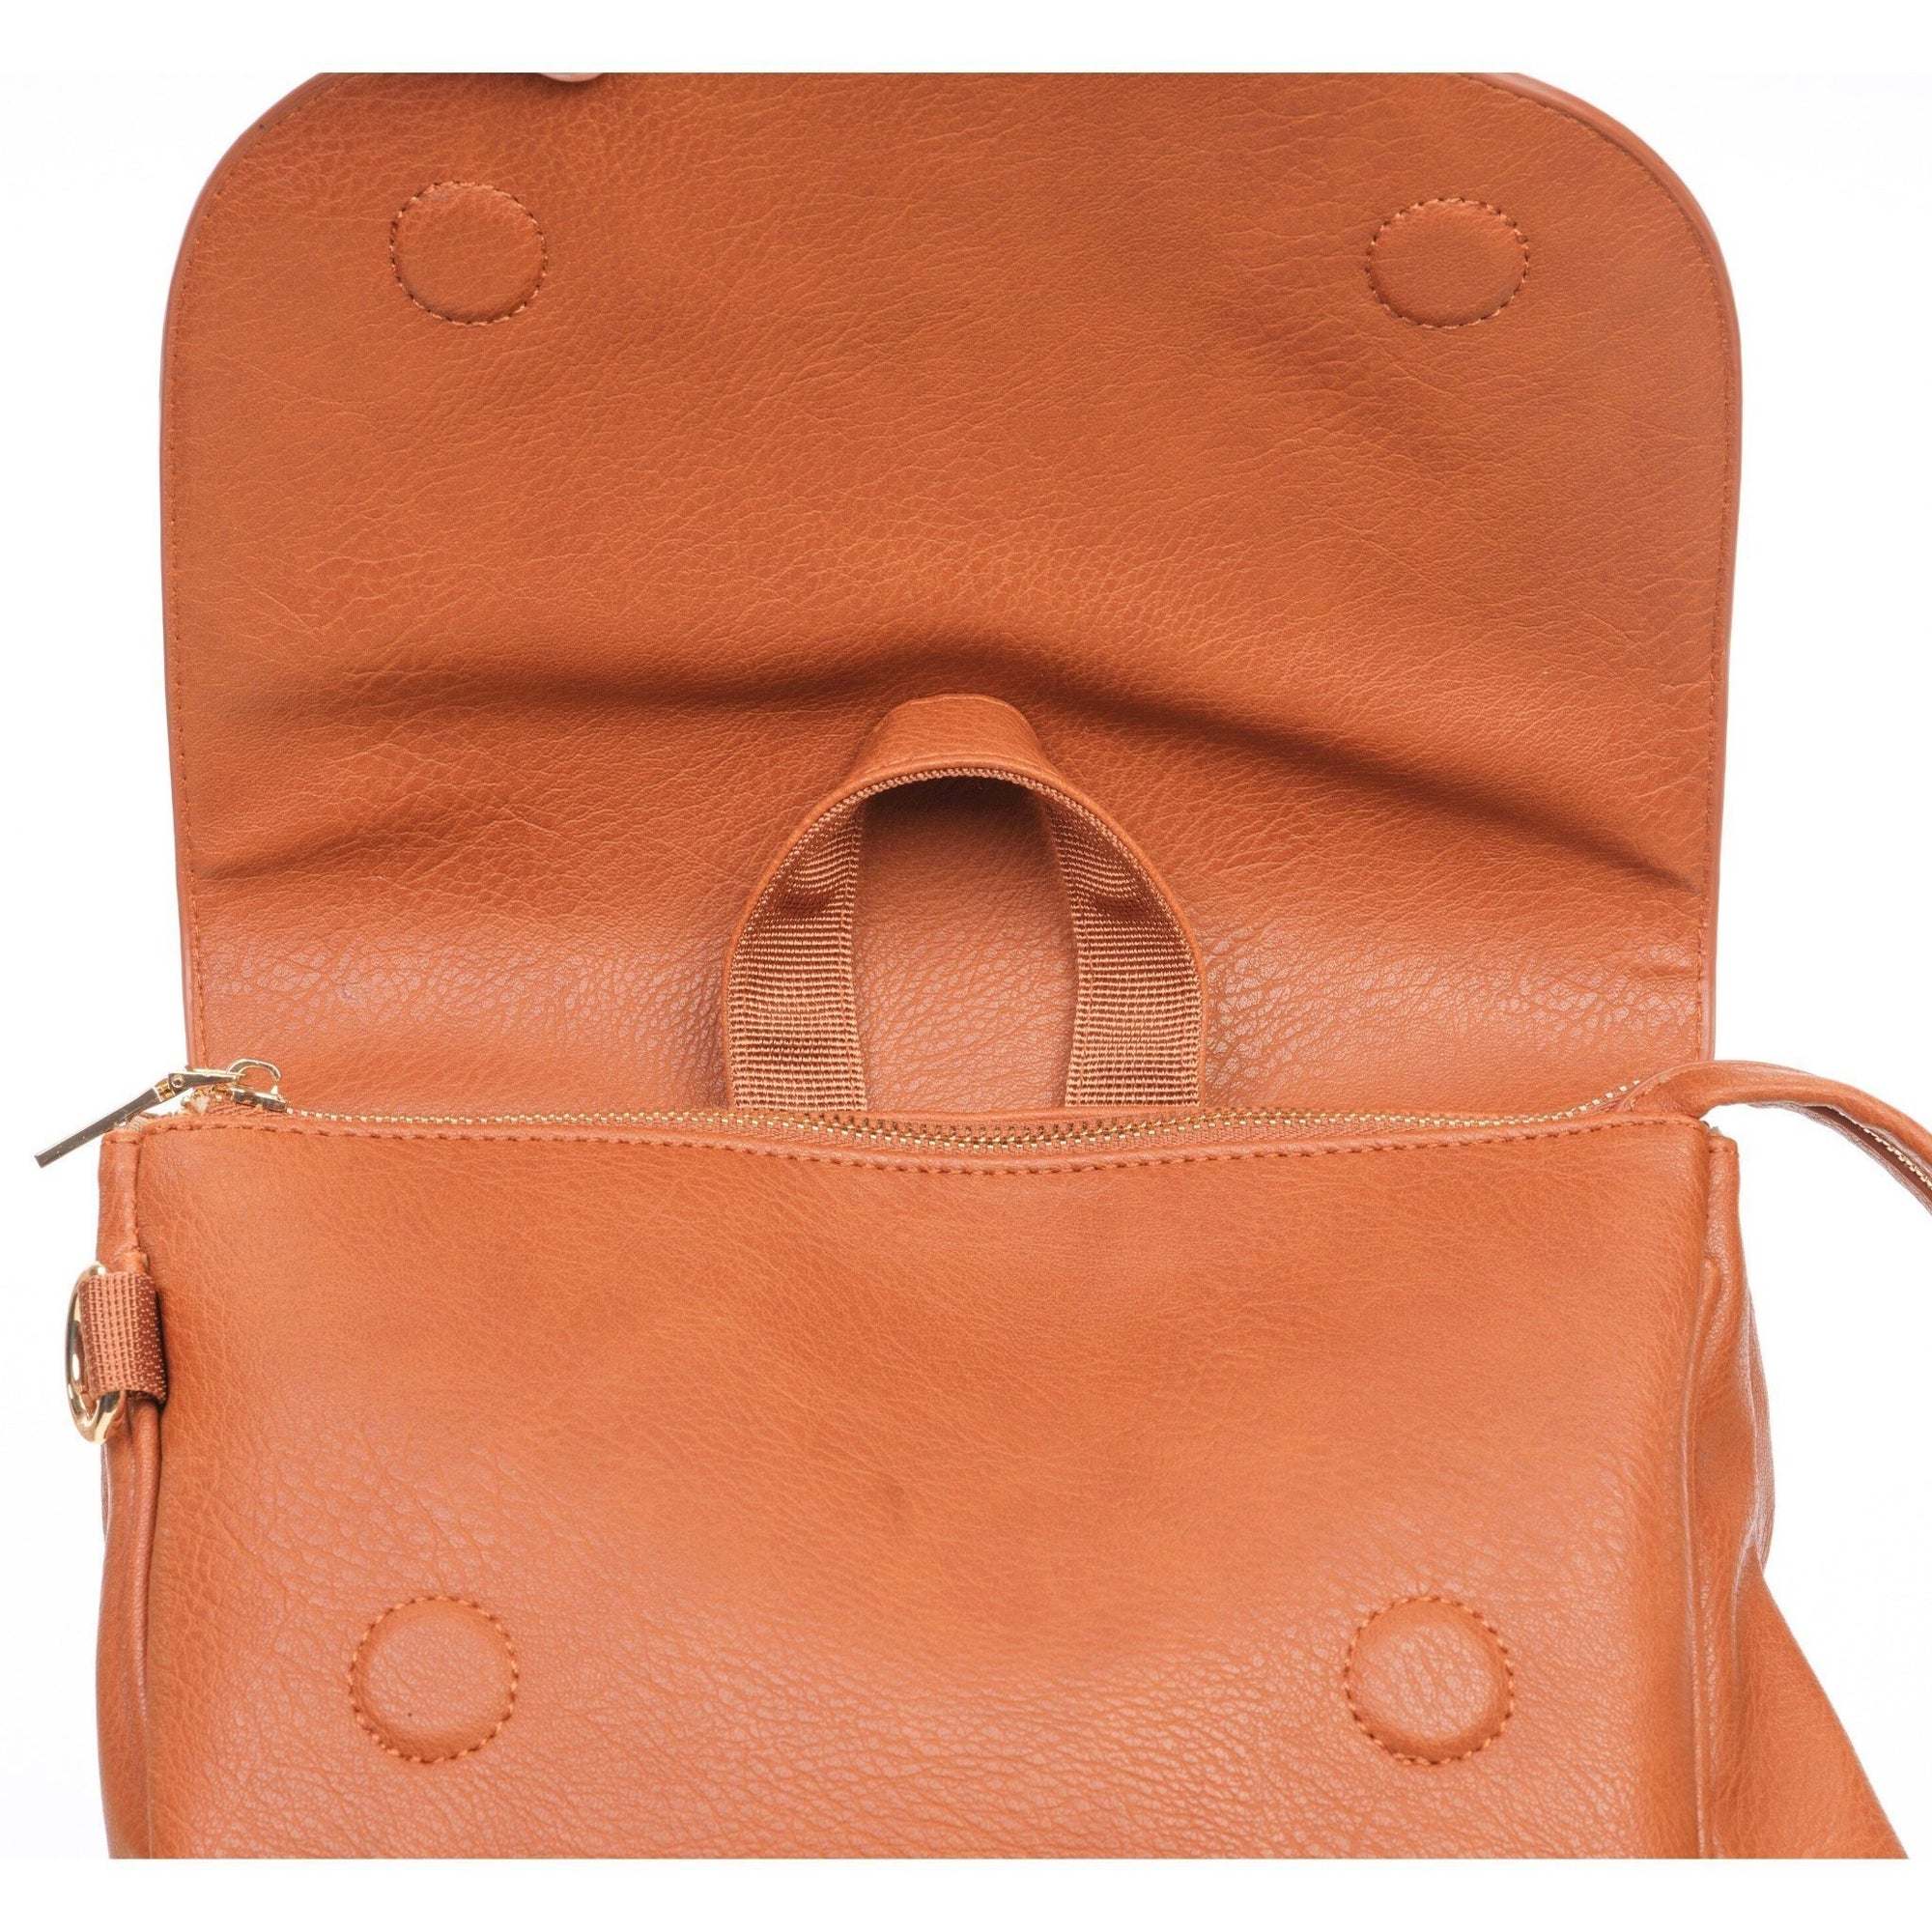 Louenhide's New Recycled Vegan Leather Accessories Range